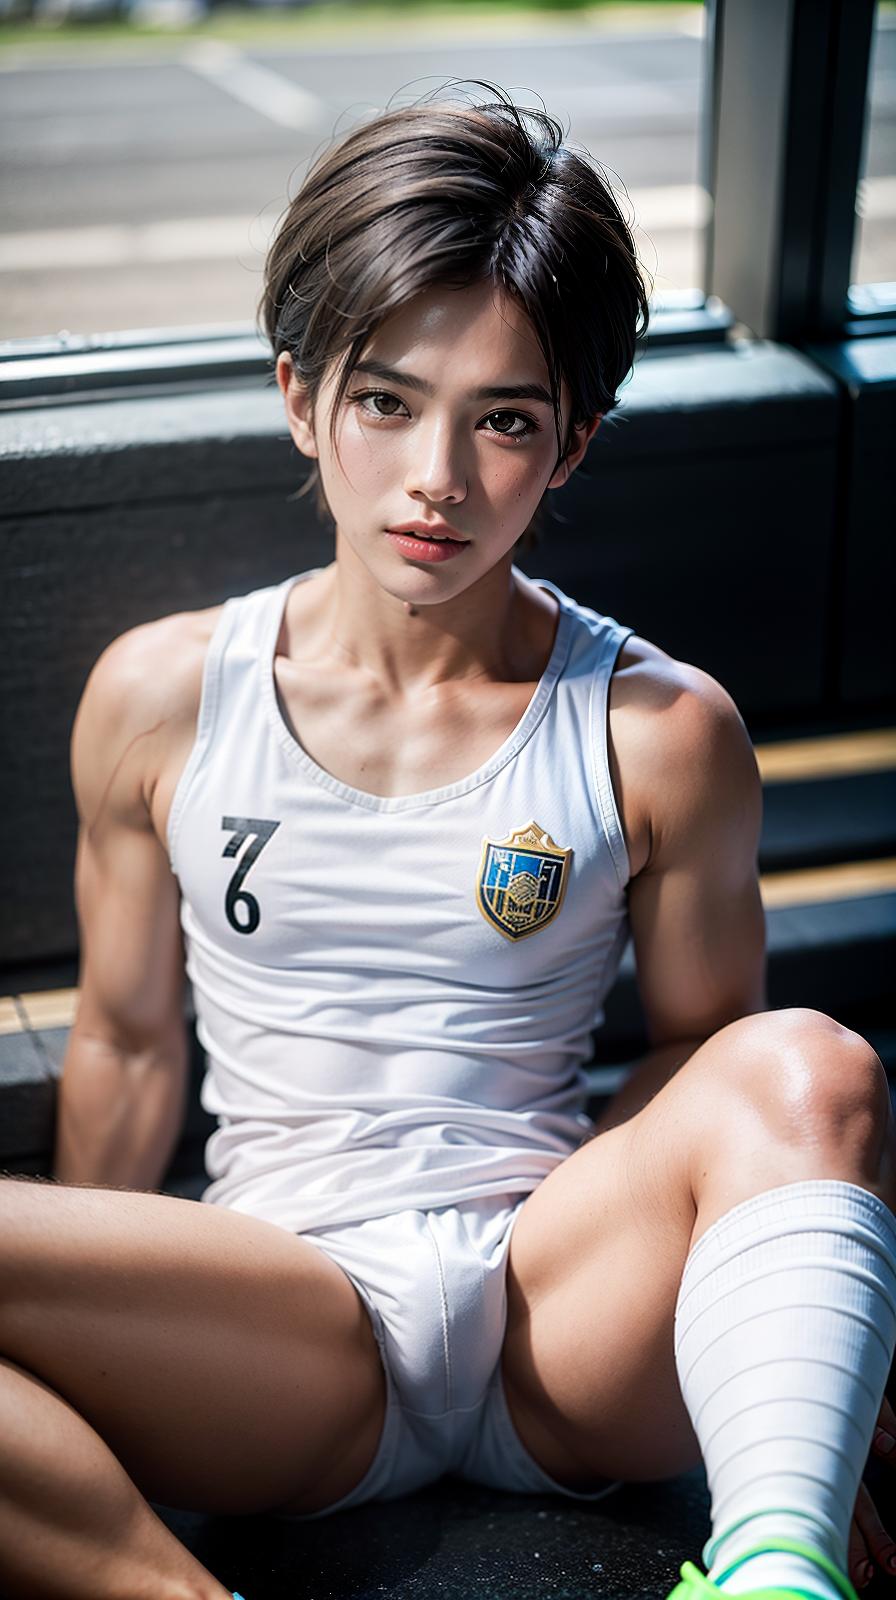  ultra high res, (photorealistic:1.4), raw photo, (realistic face), realistic eyes, (realistic skin), <lora:XXMix9_v20LoRa:0.8>, (handsome:1.1), (male:2), (asian:1.6), (soccer players:1.2), (short hair:1.2), (pompadour:1.3), (white briefs:1.3), (sleeveless:1.2), spike shoes, (soccer shin guards:1.3), young, sitting posture, (spread legs:1.1), real skin, (sexy posing:1.3), hot guy, (muscular:1.3), (naked:1.1), (bulge:1.1), trained calves, thigh, realistic, lifelike, high quality, photos taken with a single-lens reflex camera, (looking at the camera:1.2)